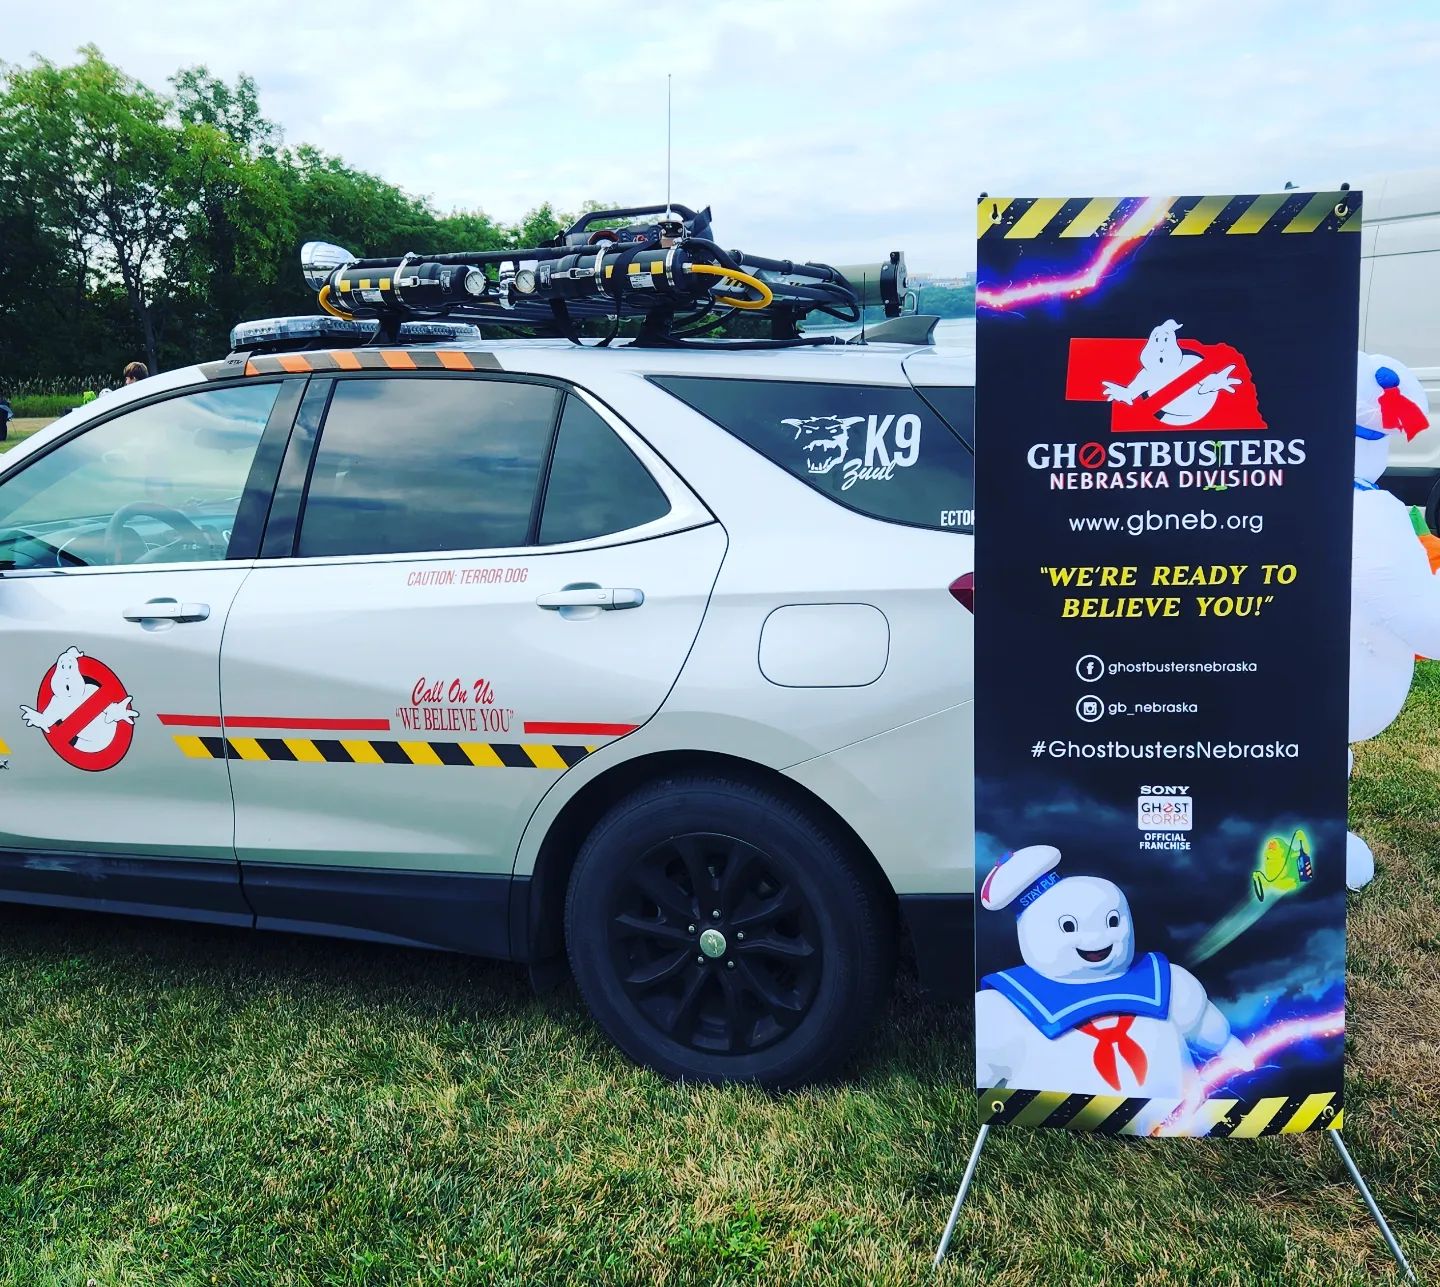 The EctoK9 Unit at an event with the Nebraska Ghostbusters banner.